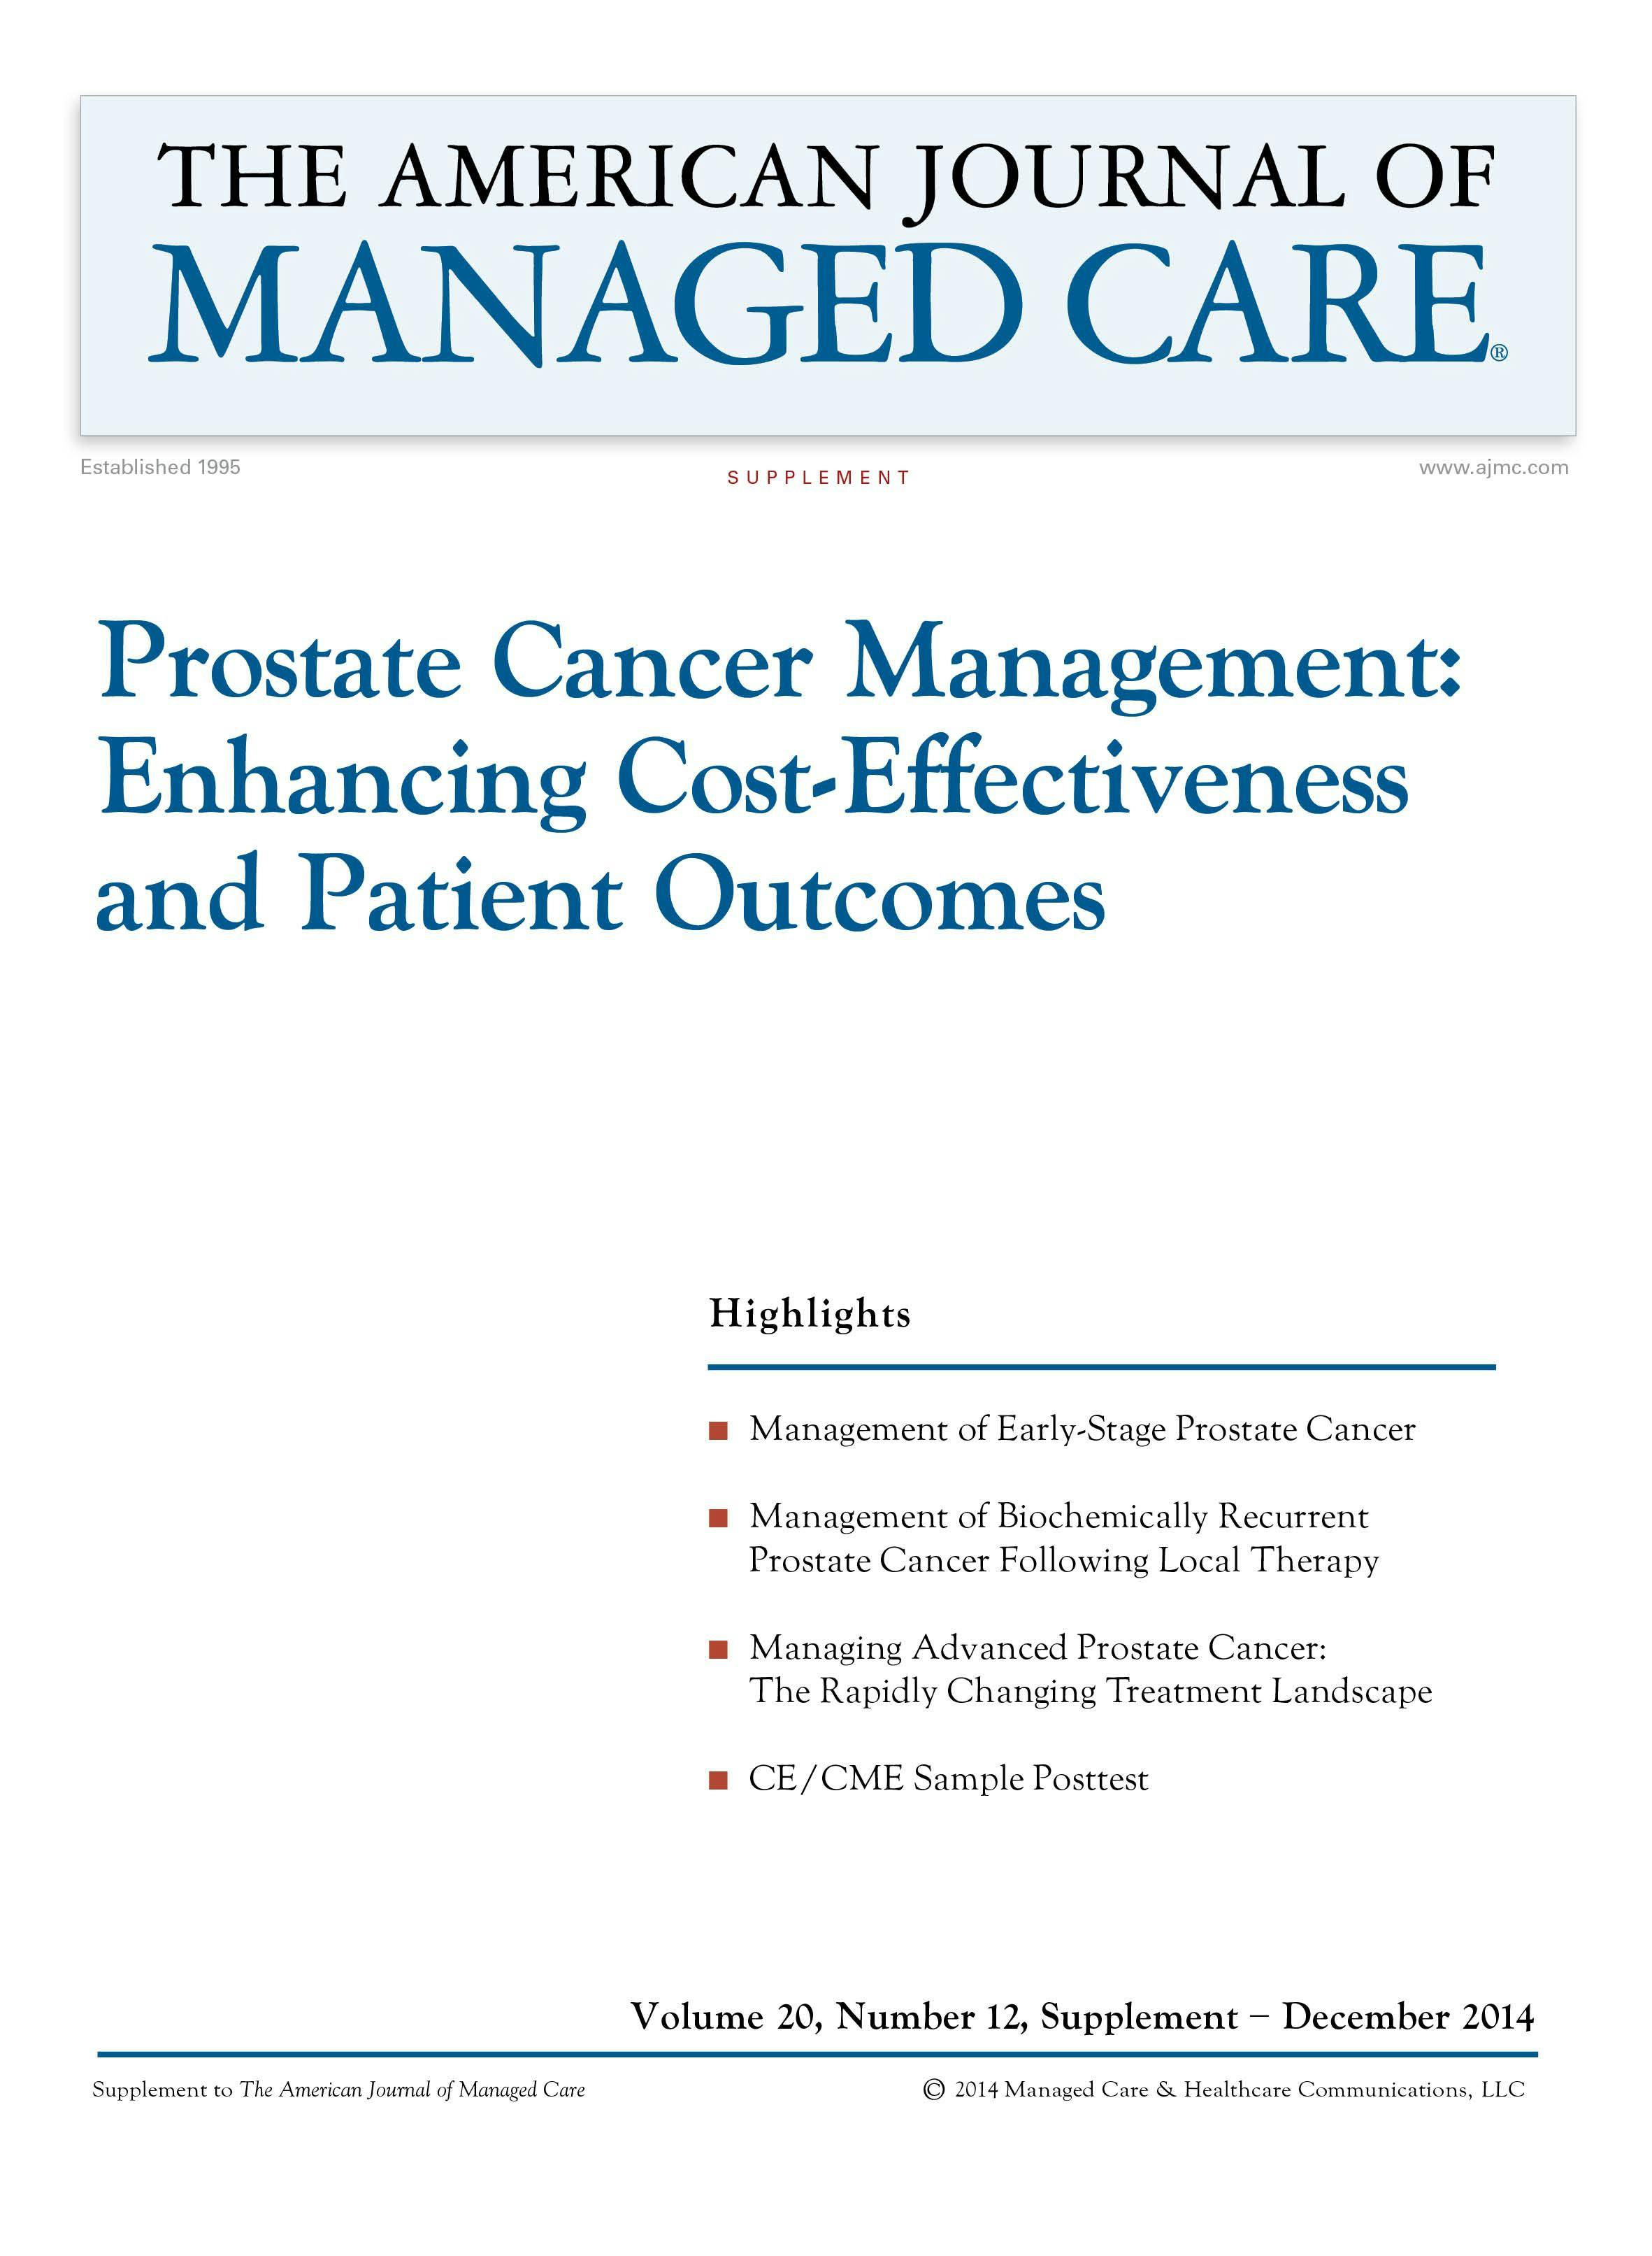 Prostate Cancer Management: Enhancing Cost-Effectiveness and Patient Outcomes [CME/CPE]